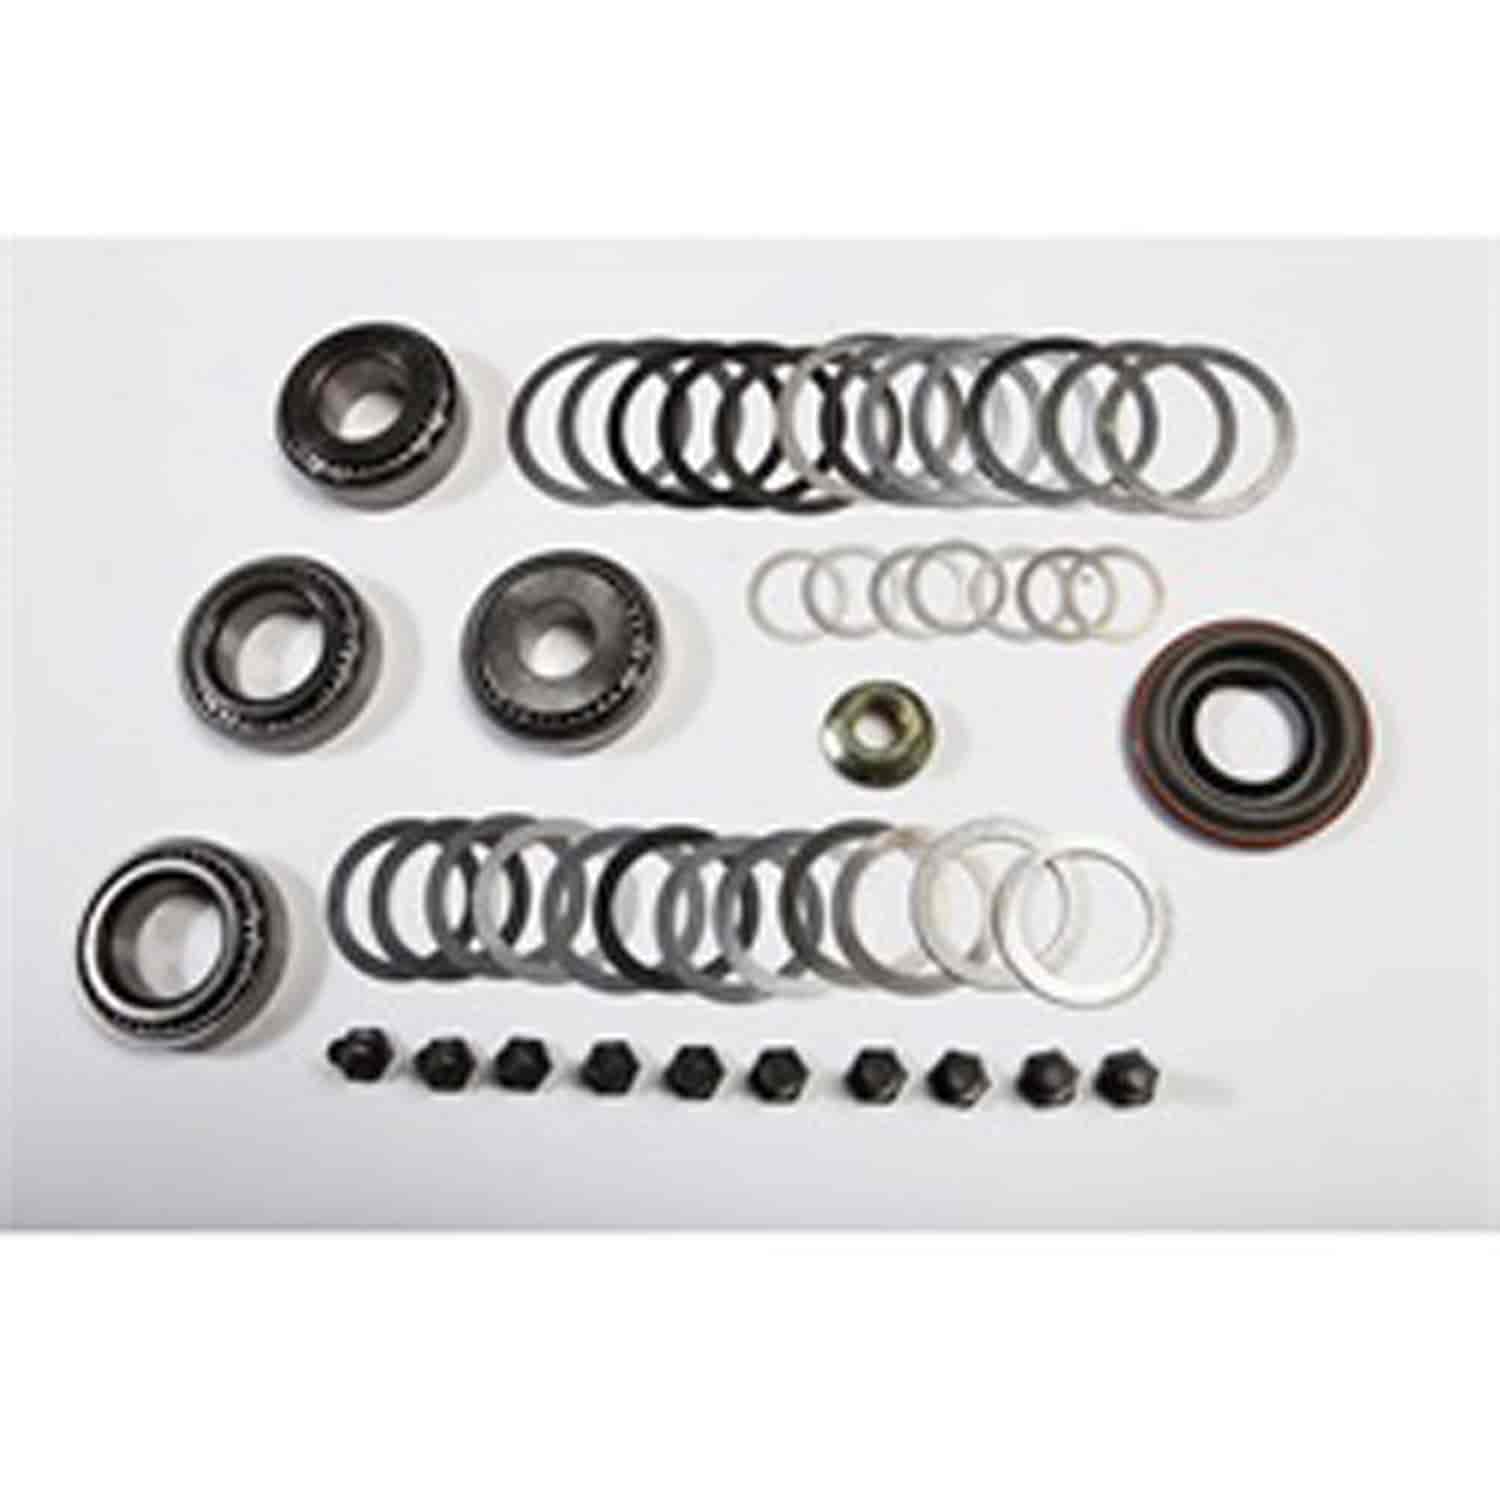 This differential rebuild kit for Dana 30 w/ Disconnect fits 84-91 Jeep Cherokee 87-95 Wrangler